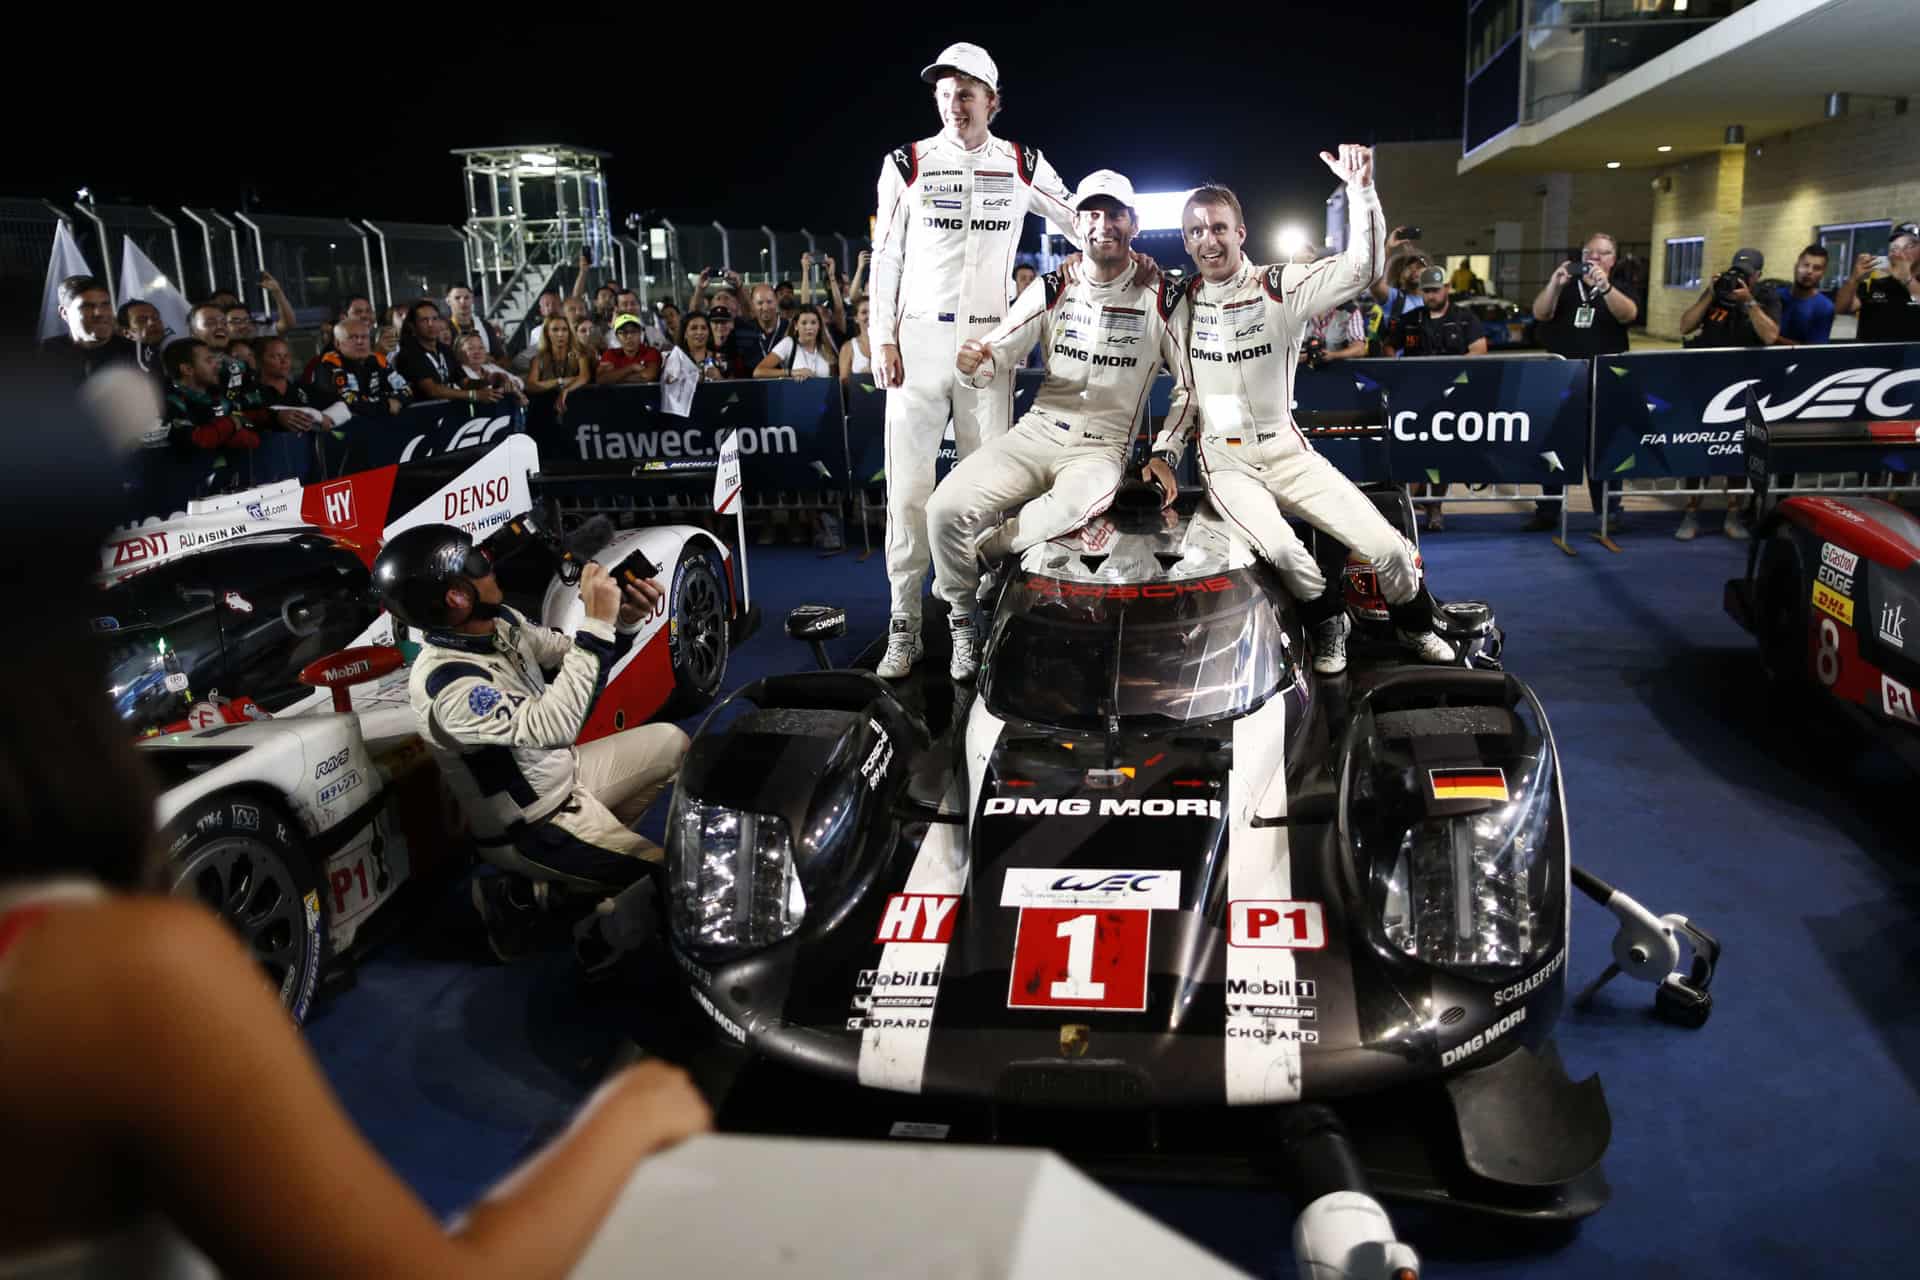 Porsche Motorsport team records a fifth victory at the WEC 6 Hours of COTA 2016